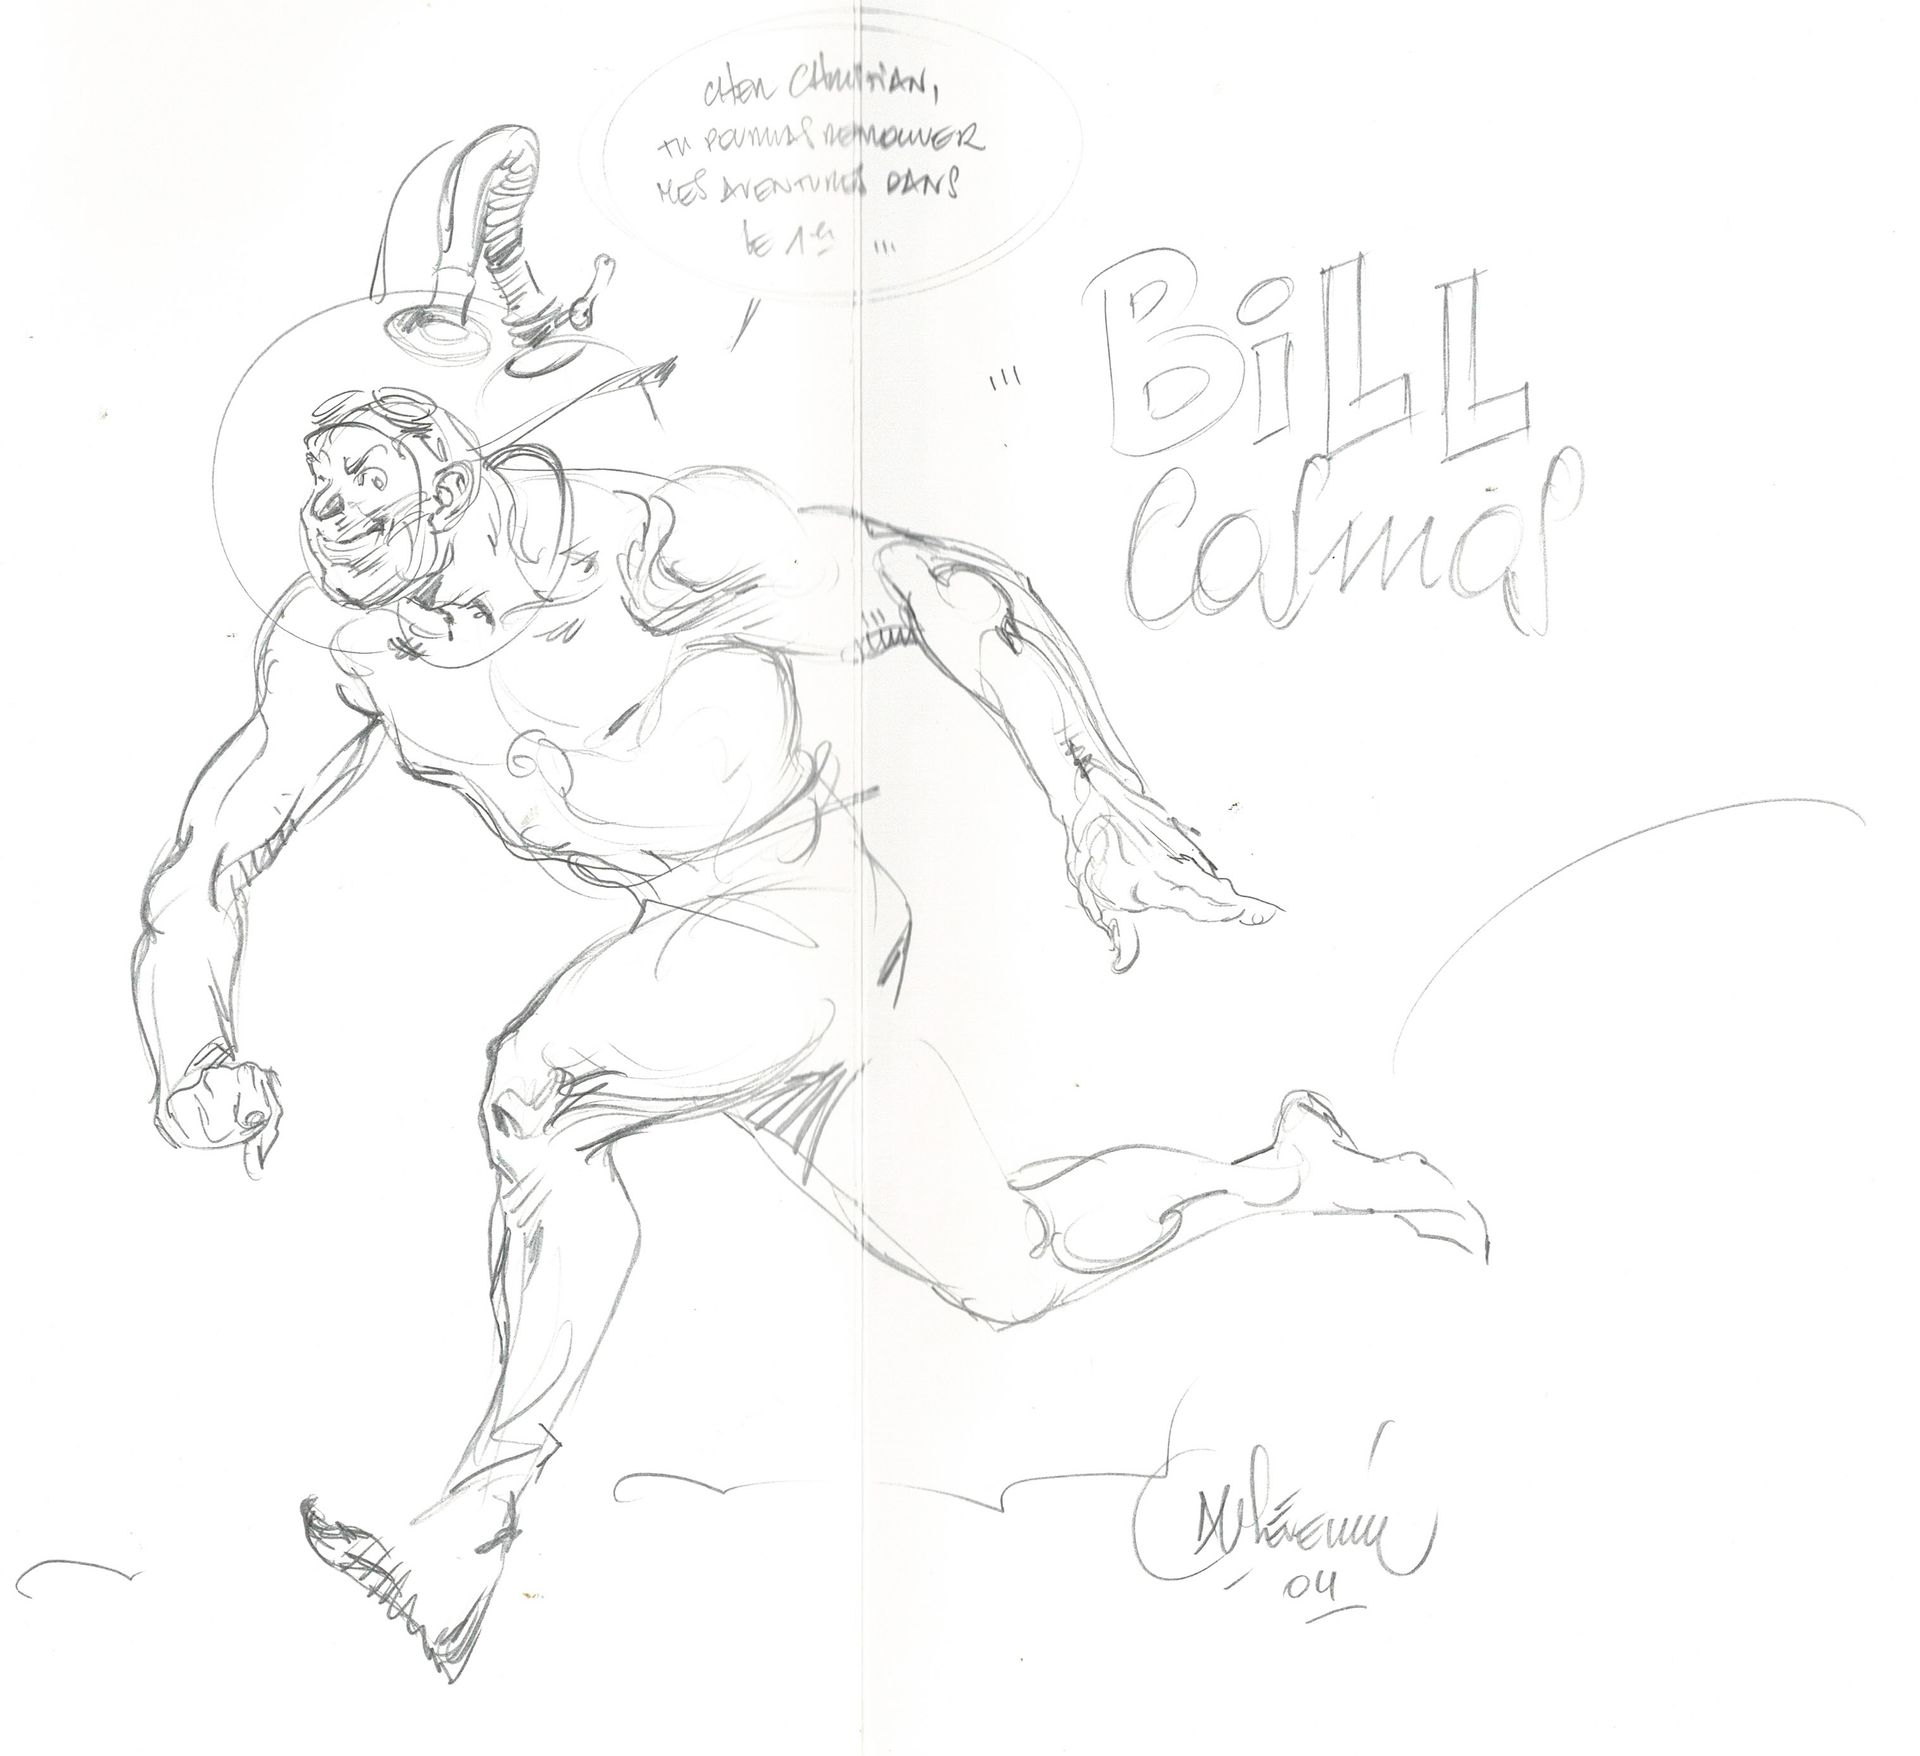 AL SEVERIN 
Bill Cosmos, the meanders of time! With a dedication from Severin. T&hellip;